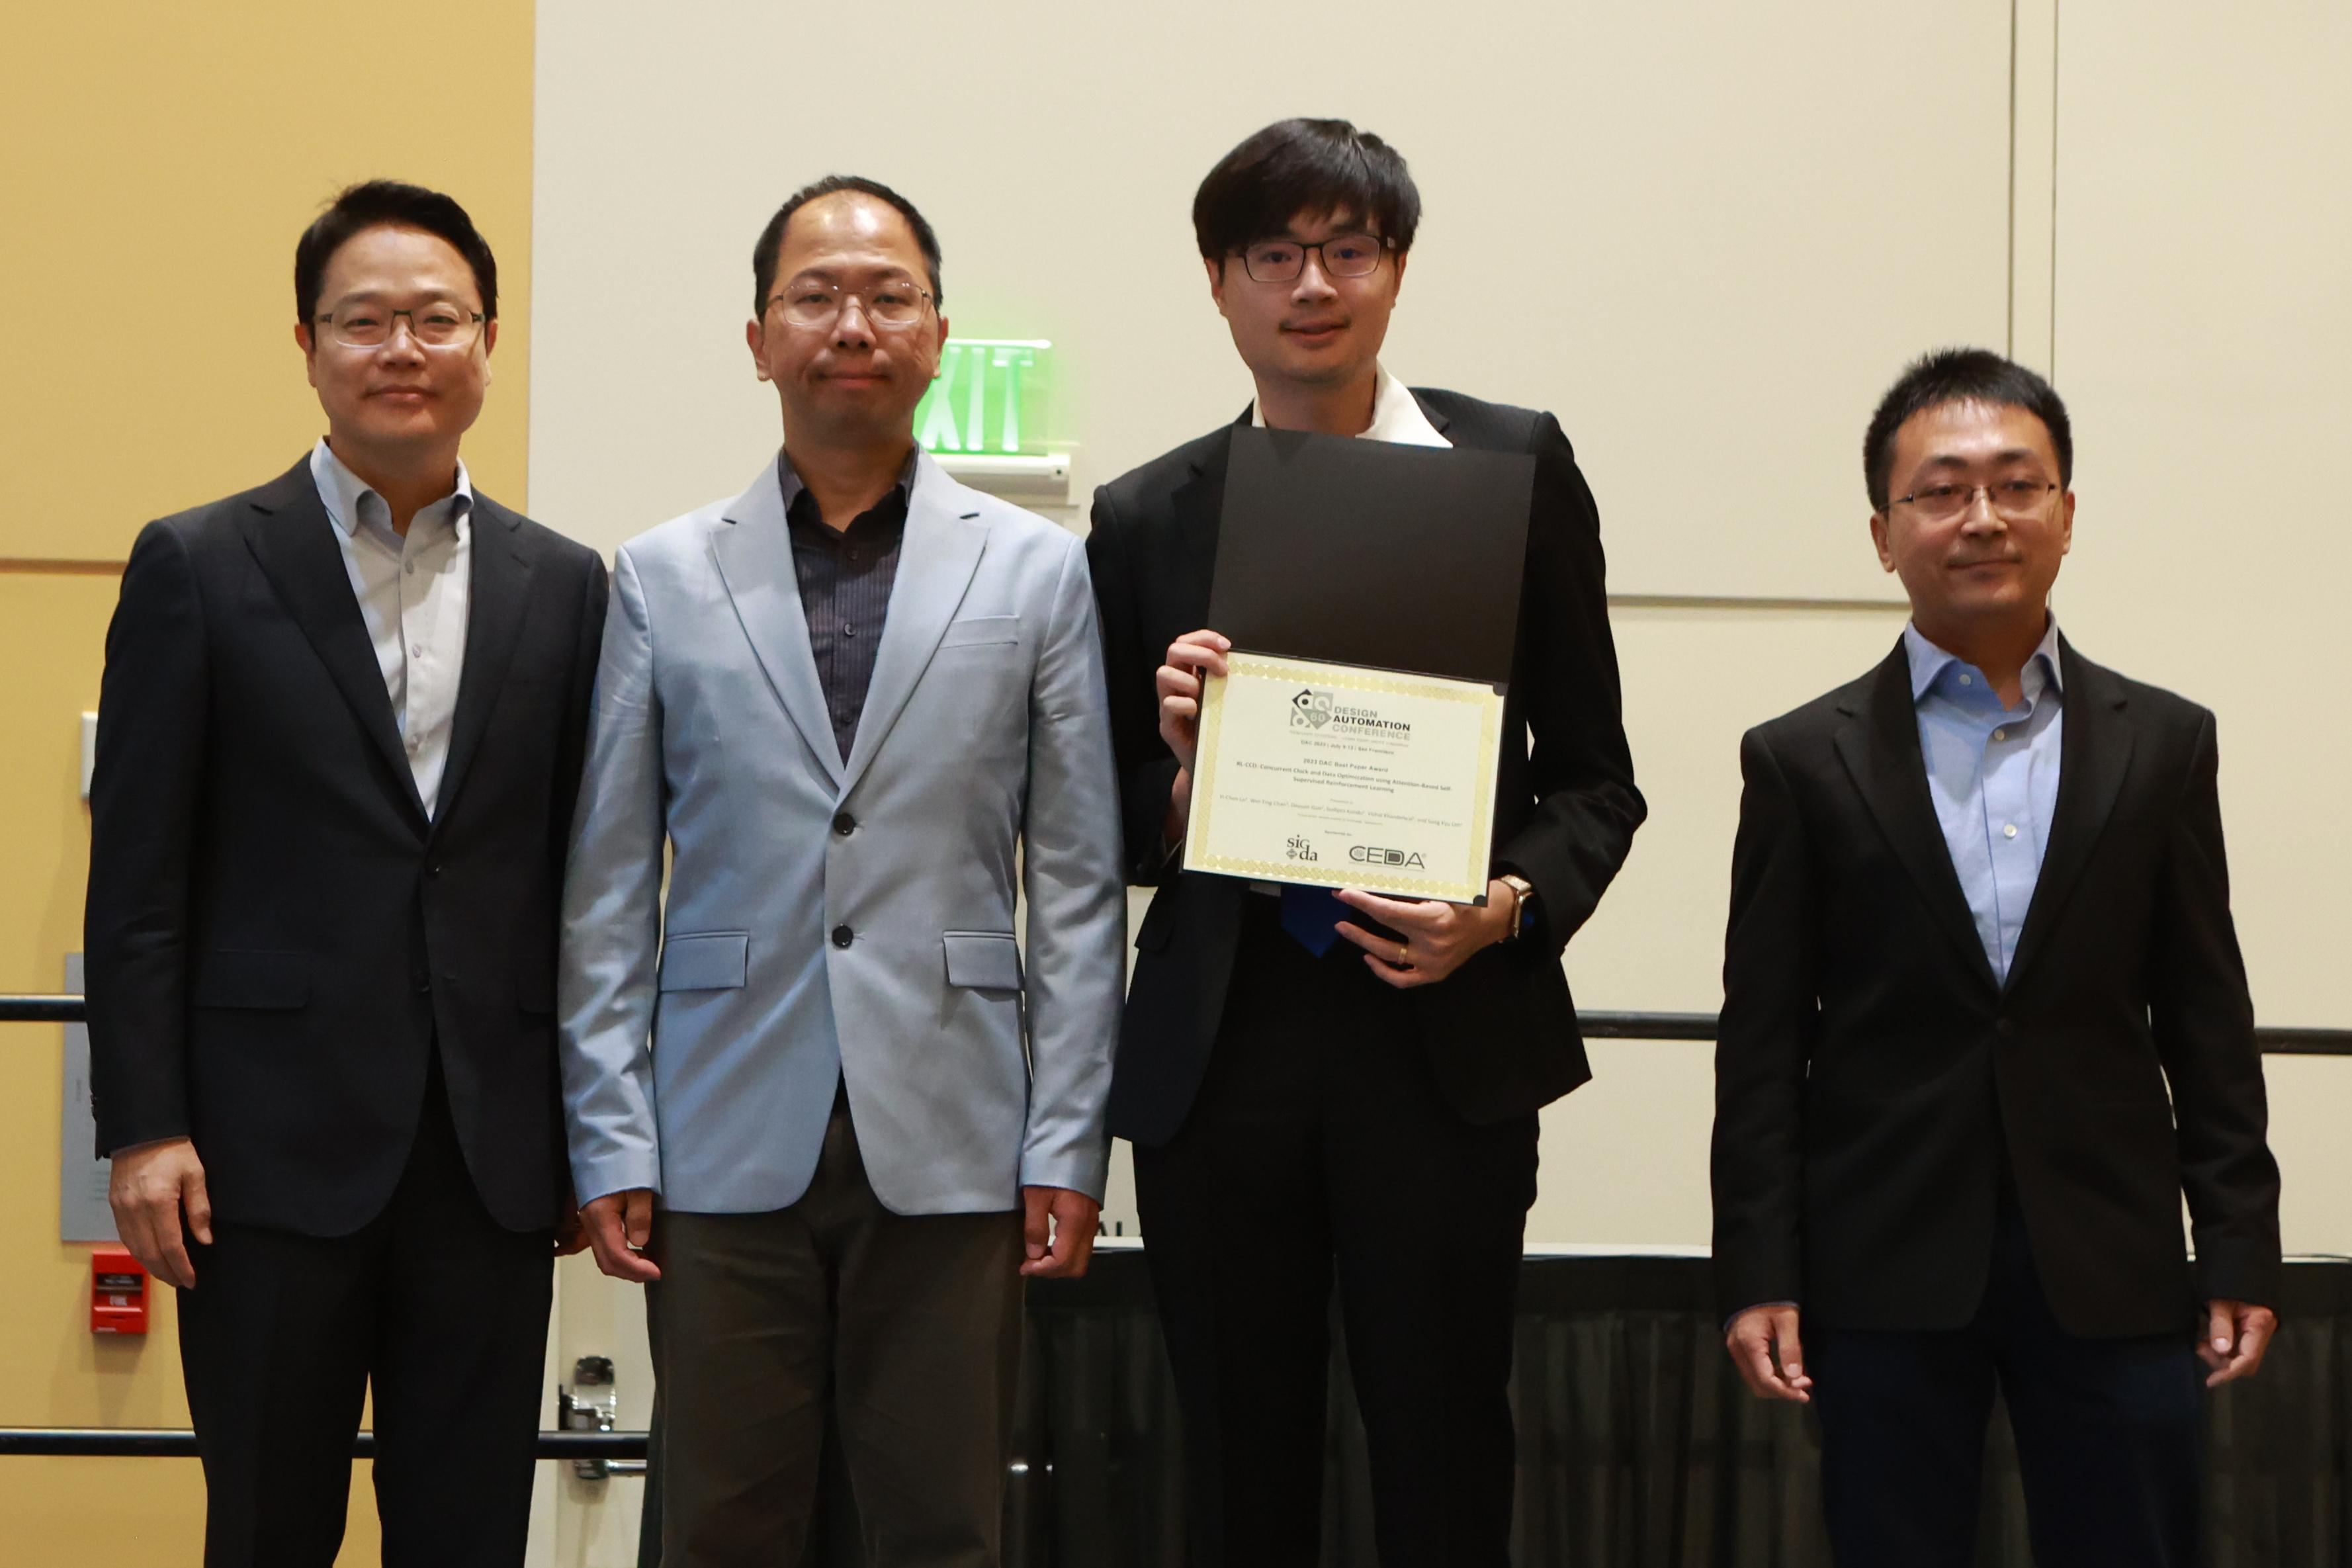 The team receiving the Design Automation Conference (DAC) Best Paper Award For Research in July. Left to right: Sung Kyu Lim, Wei-Ting Chan, Yi-Chen Lu, and Deyuan Guo (not pictured: Vishal Khandelwal, and Sudipto Kundu).